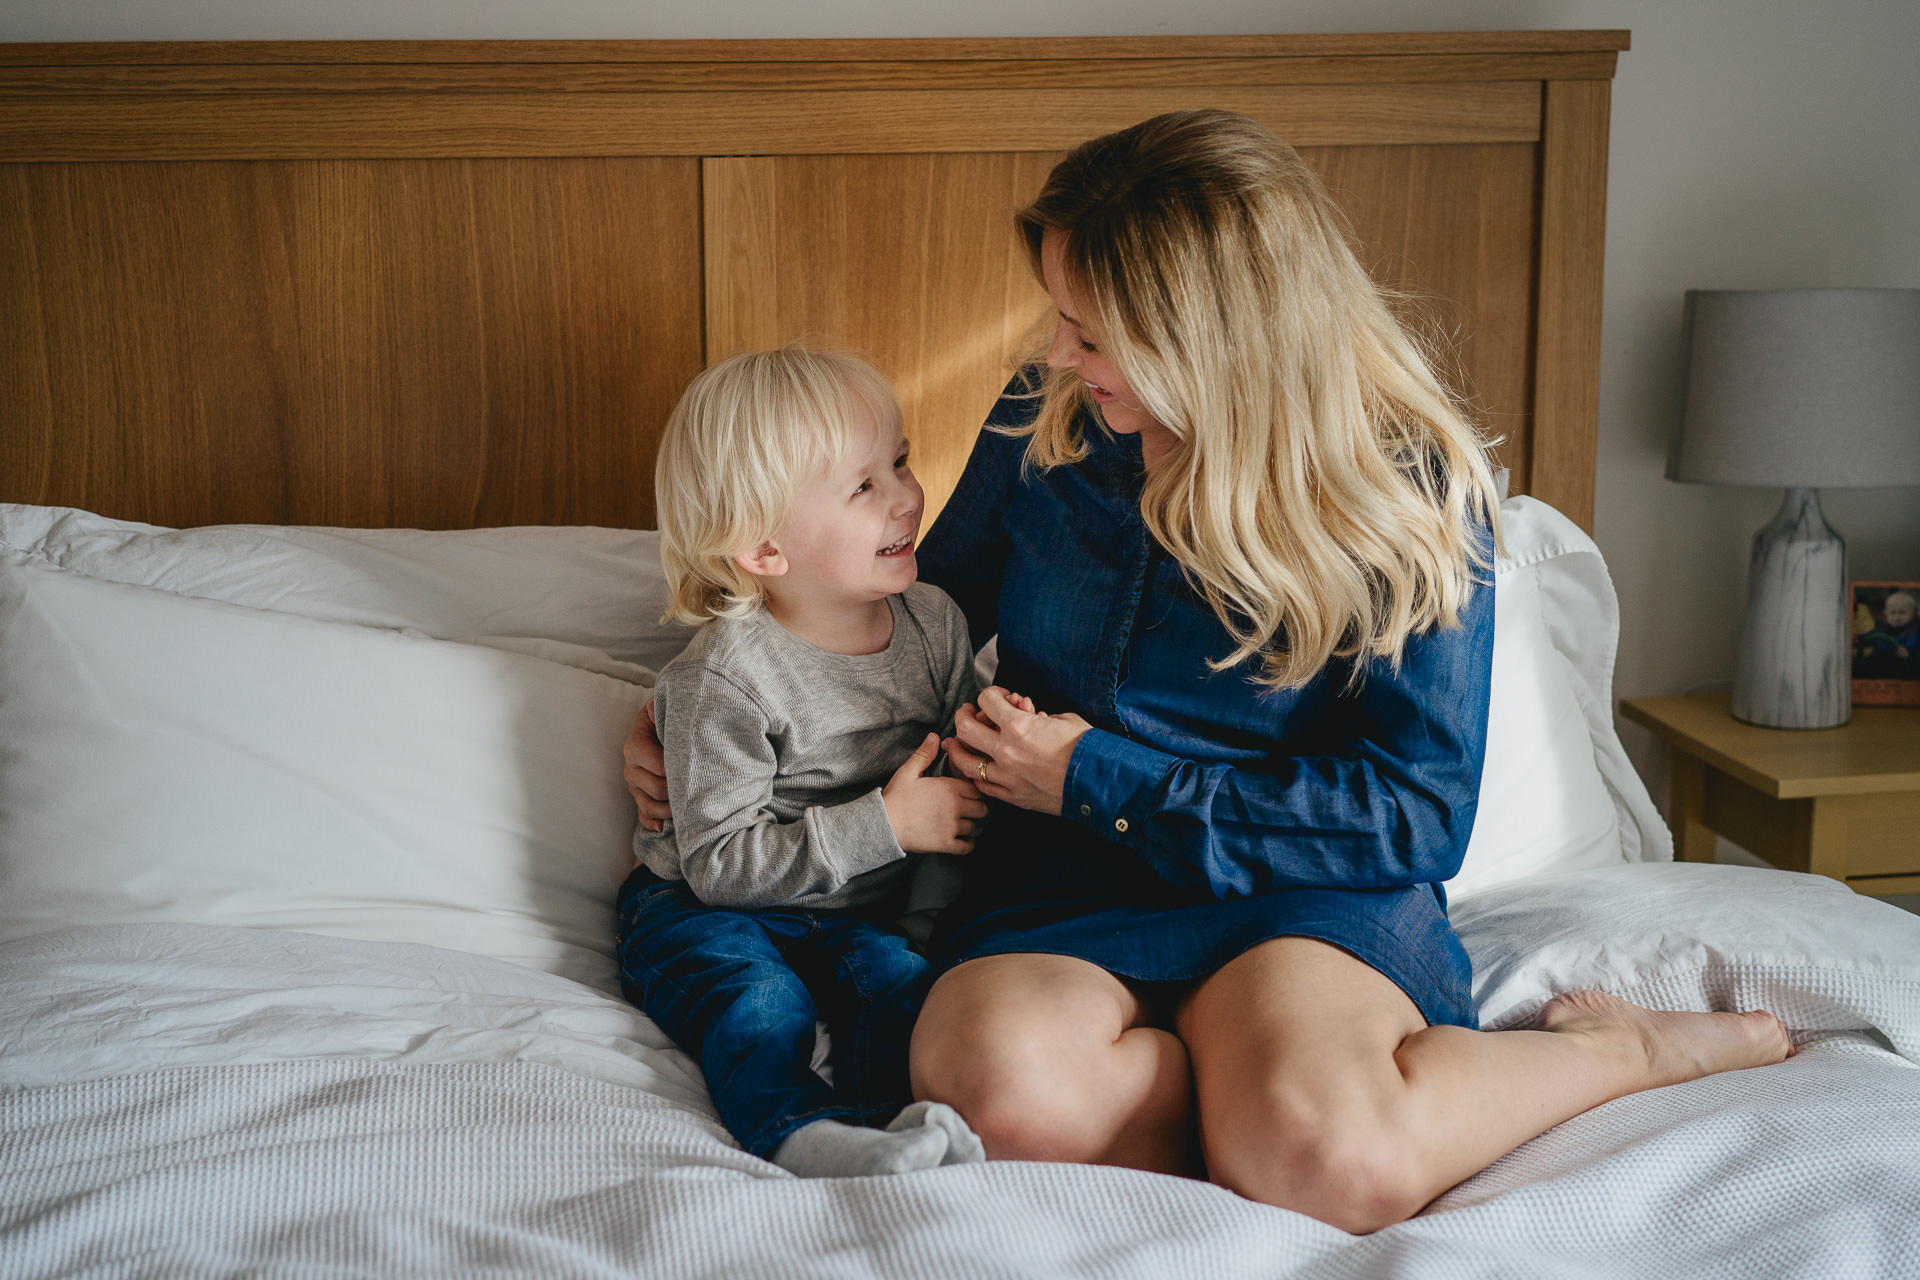 Dorset family photography - a mother and her young son laughing together on a bed